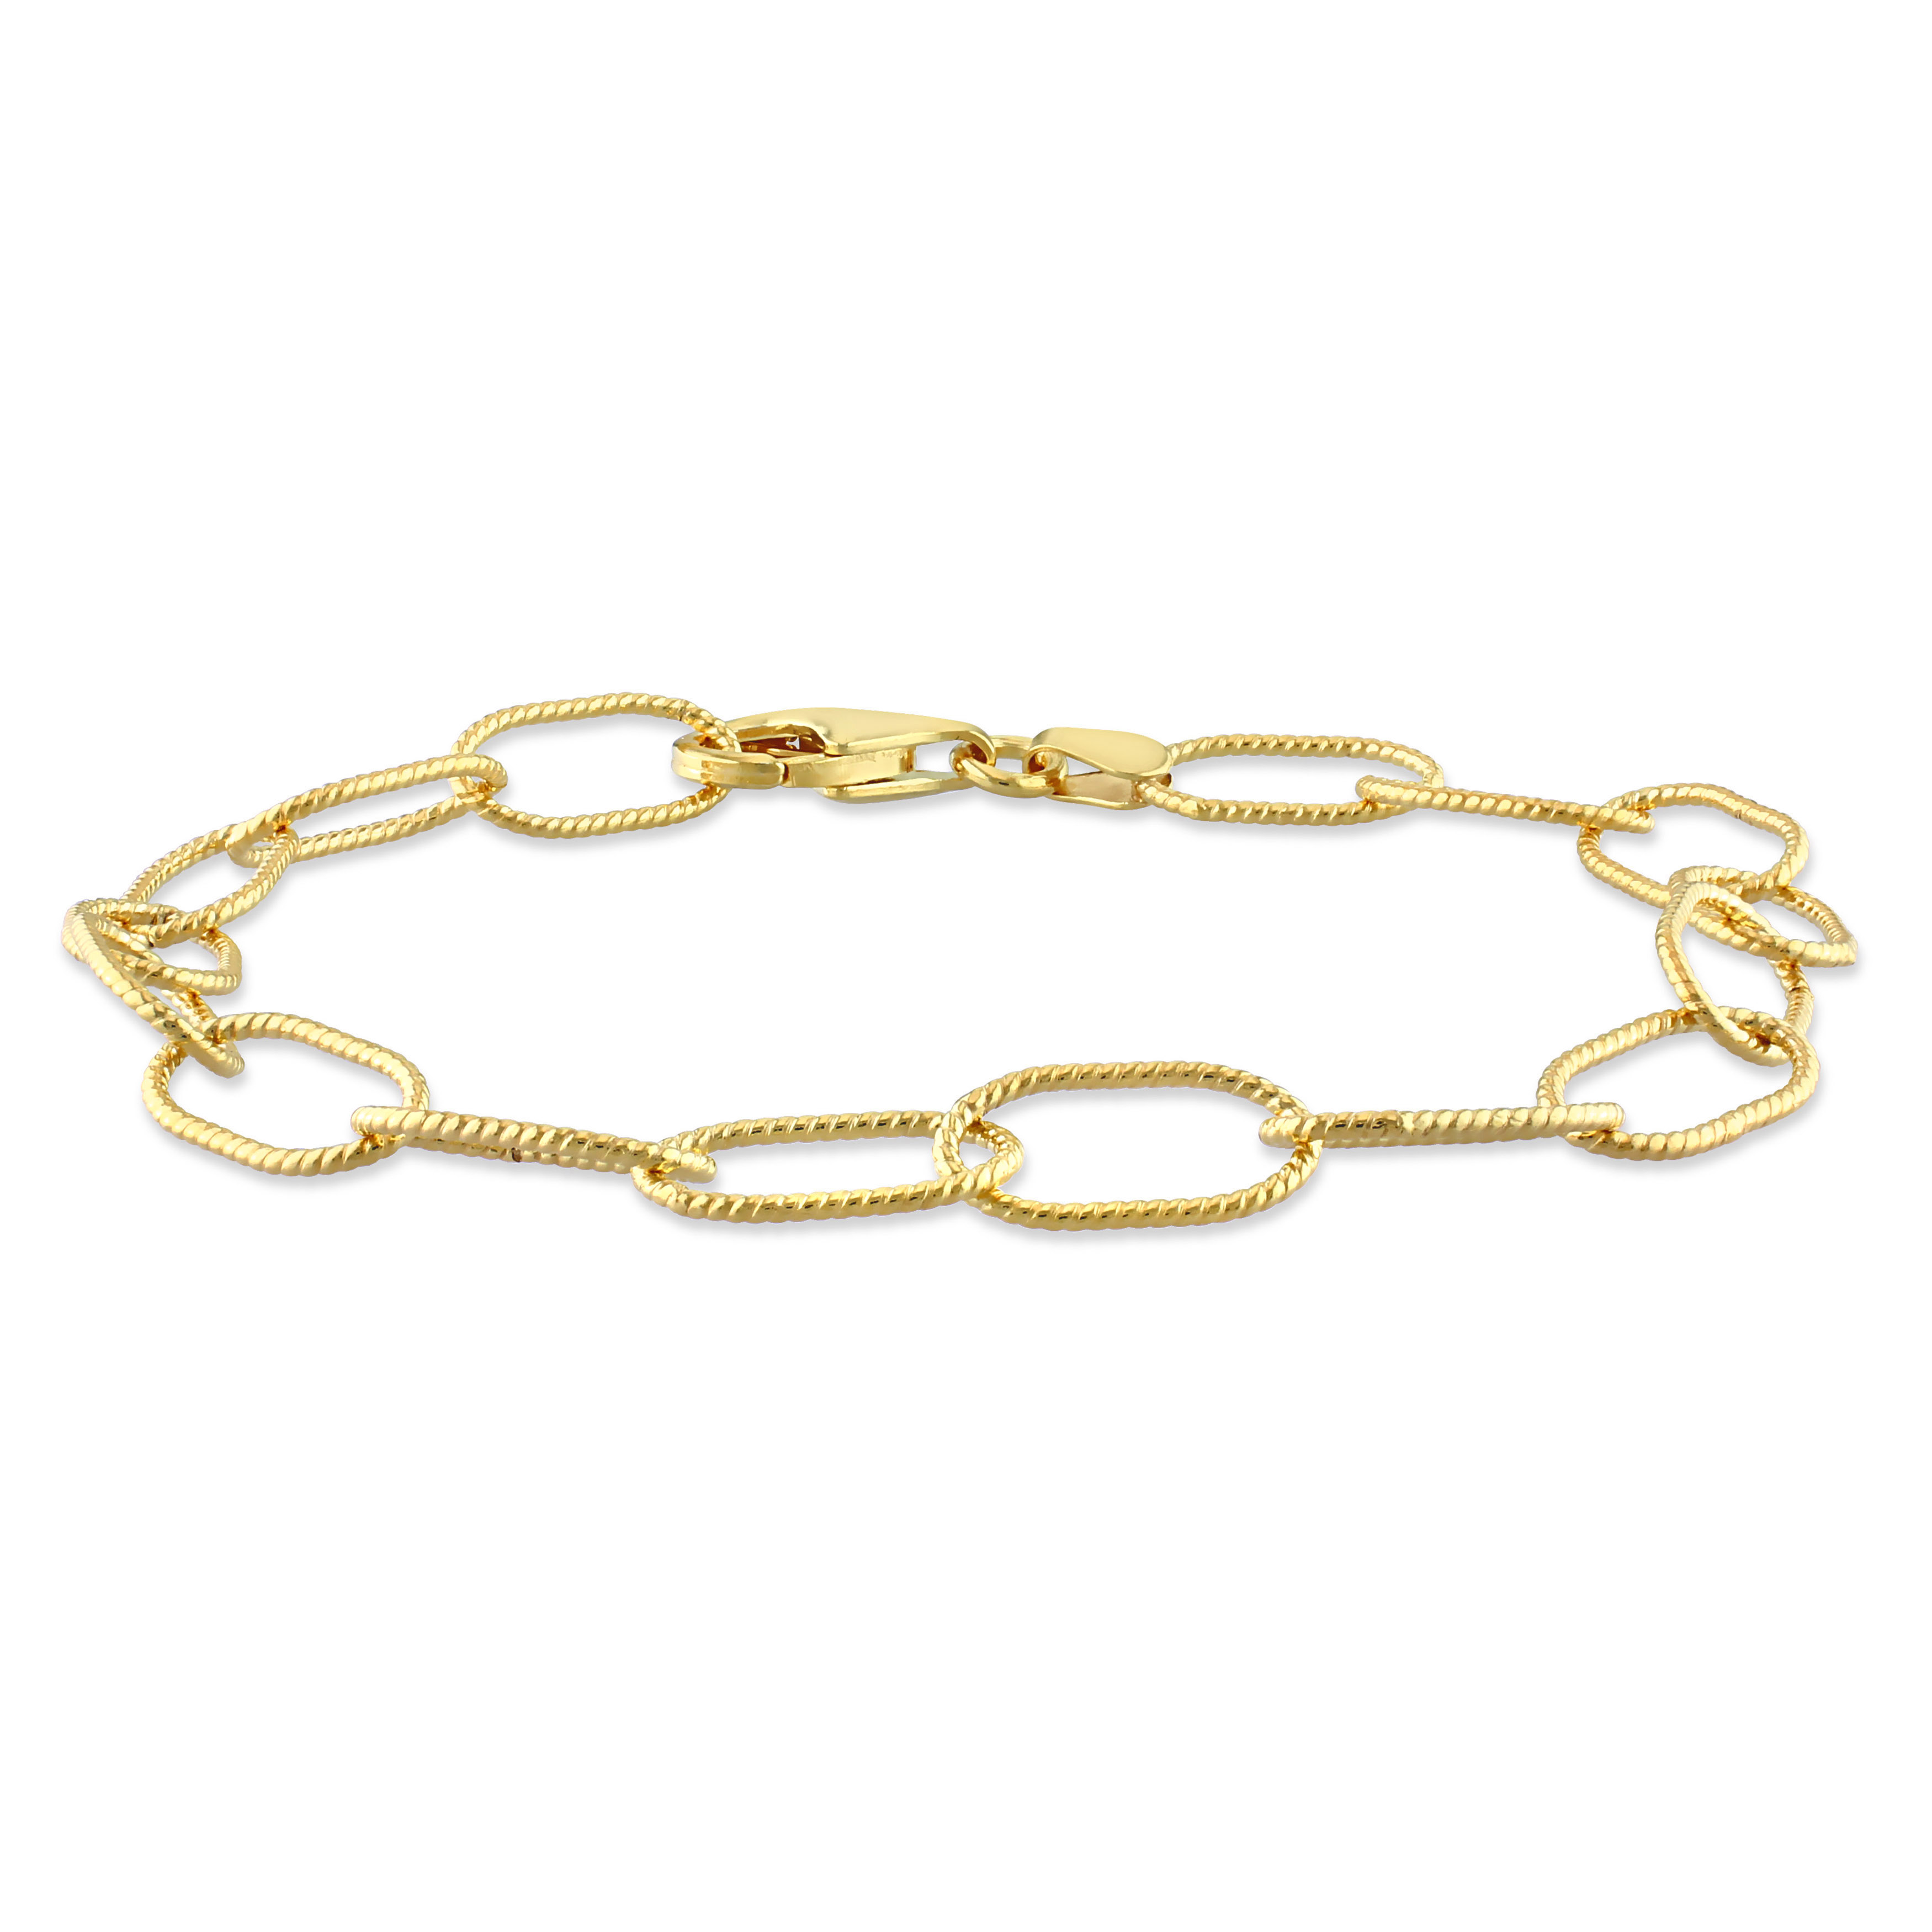 6.5mm Rolo Chain Link Bracelet in 18k Yellow Gold Plated Sterling Silver - 9 in.